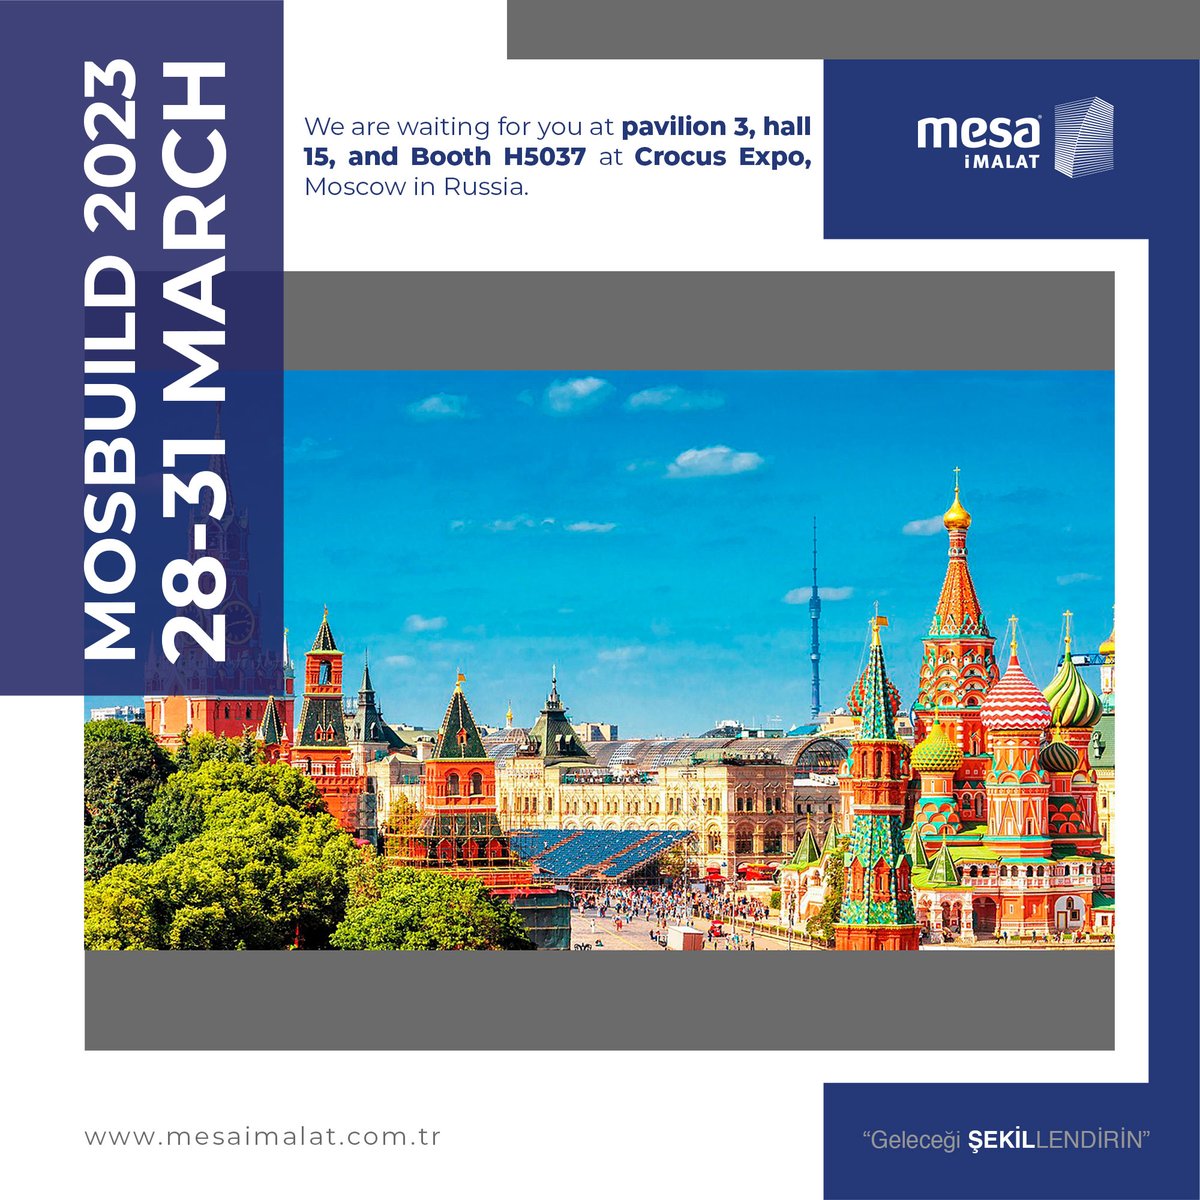 We will be participating in Mosbuild 2023 in Moscow, Russia! Visit us at Crocus Expo, pavilion 3, hall 15, booth H5037. See you there!

#Mosbuil2023 #exhibition #Moscow